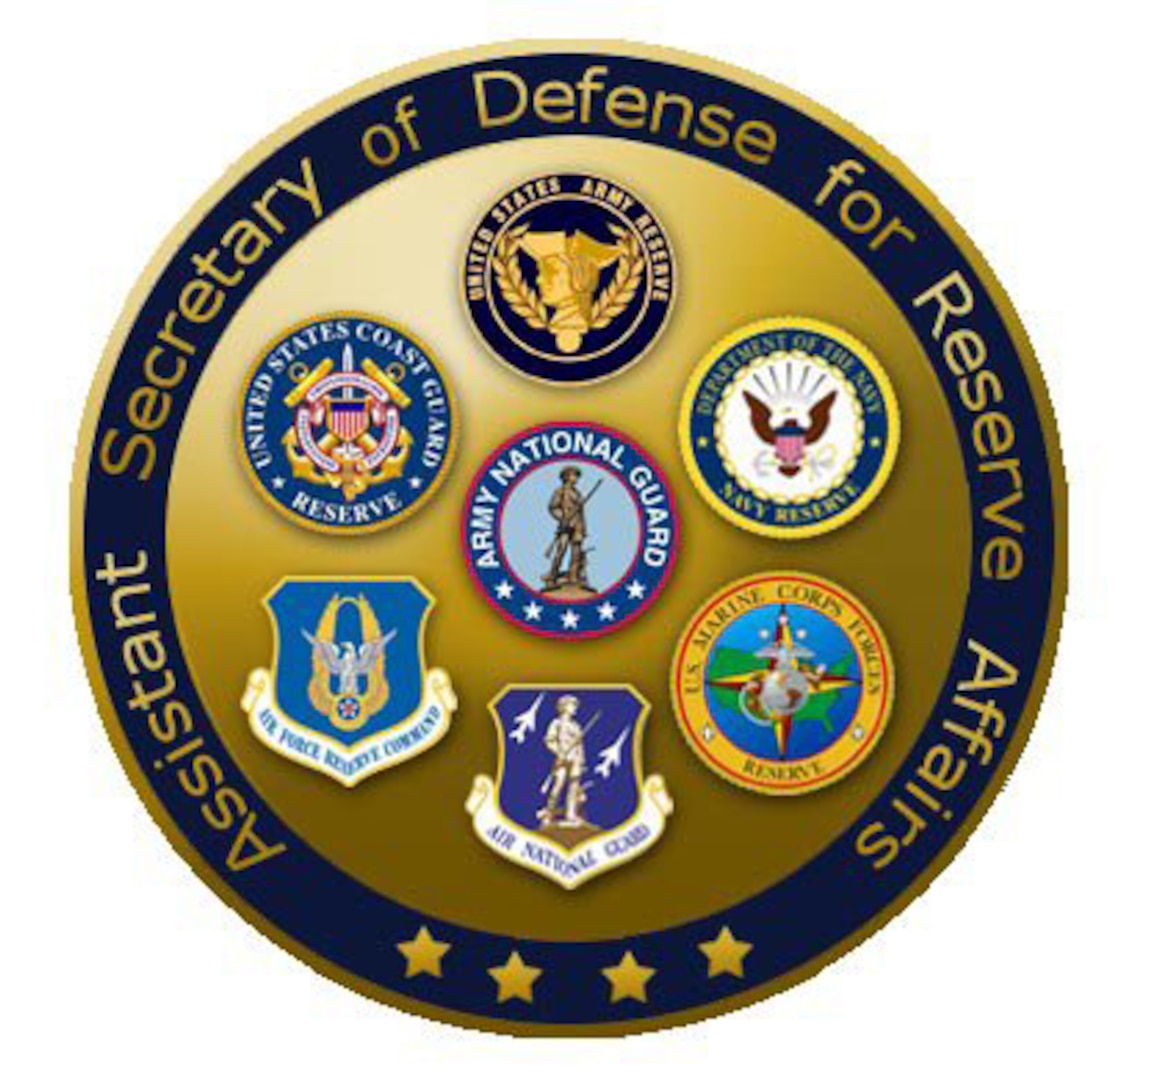 Office of the Assistant Secretary of Defense for Reserve Affairs